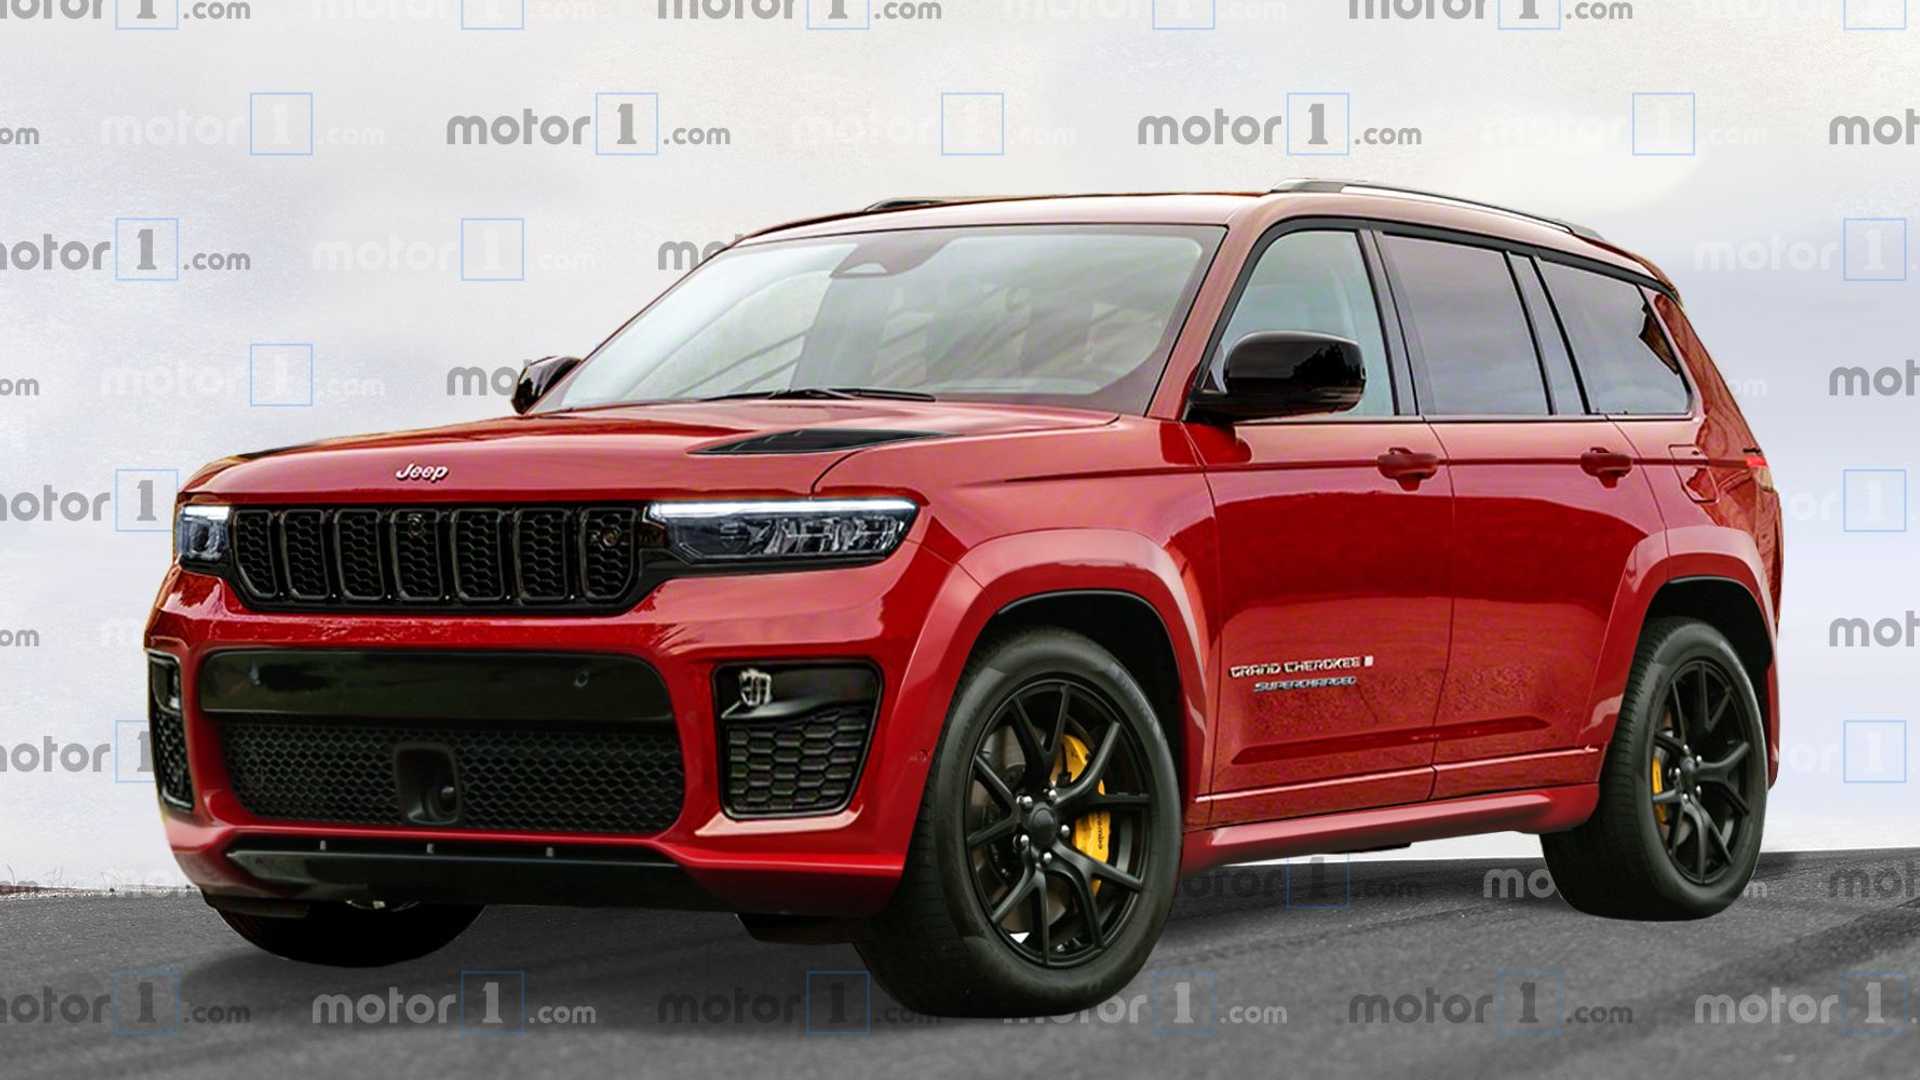 Jeep Grand Cherokee L Trackhawk Unofficially Rendered As 3 Row Super SUV